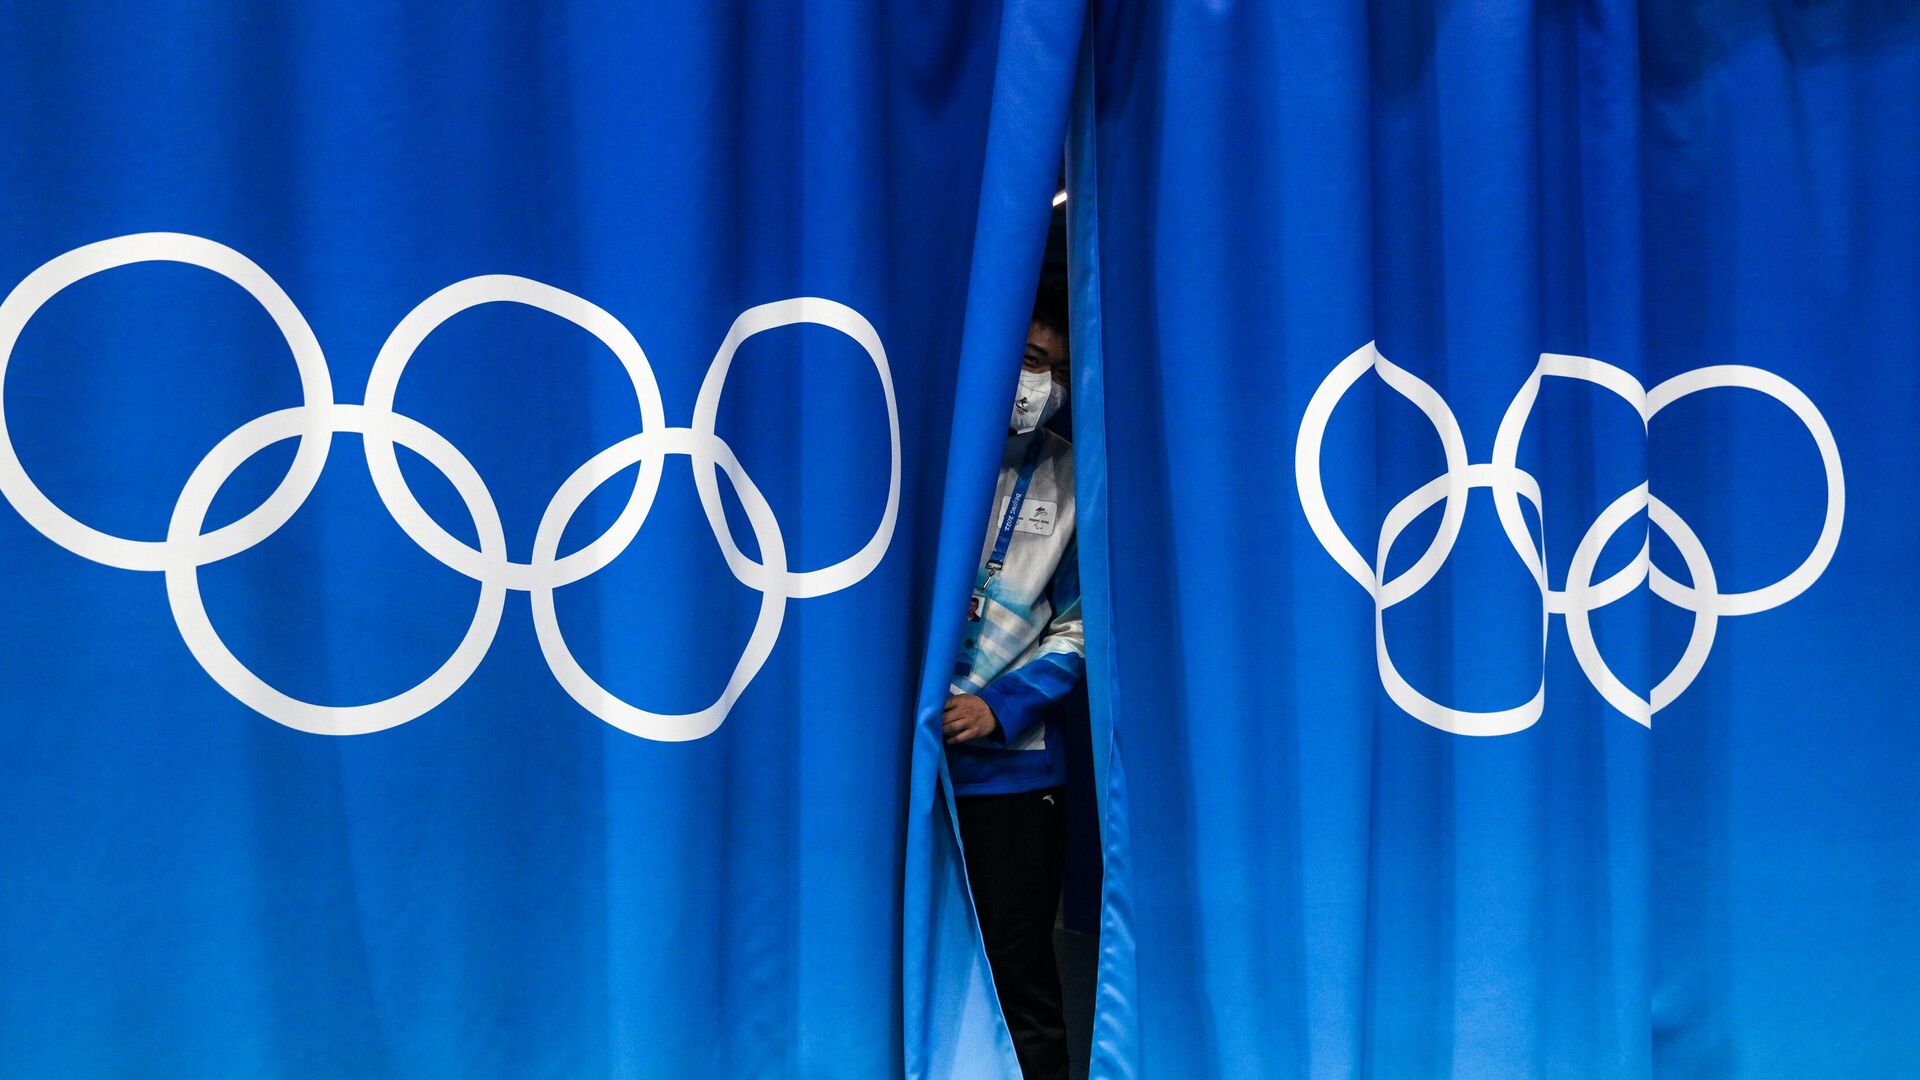 Curtain with the image of the Olympic rings - 1920, 24.09.2022